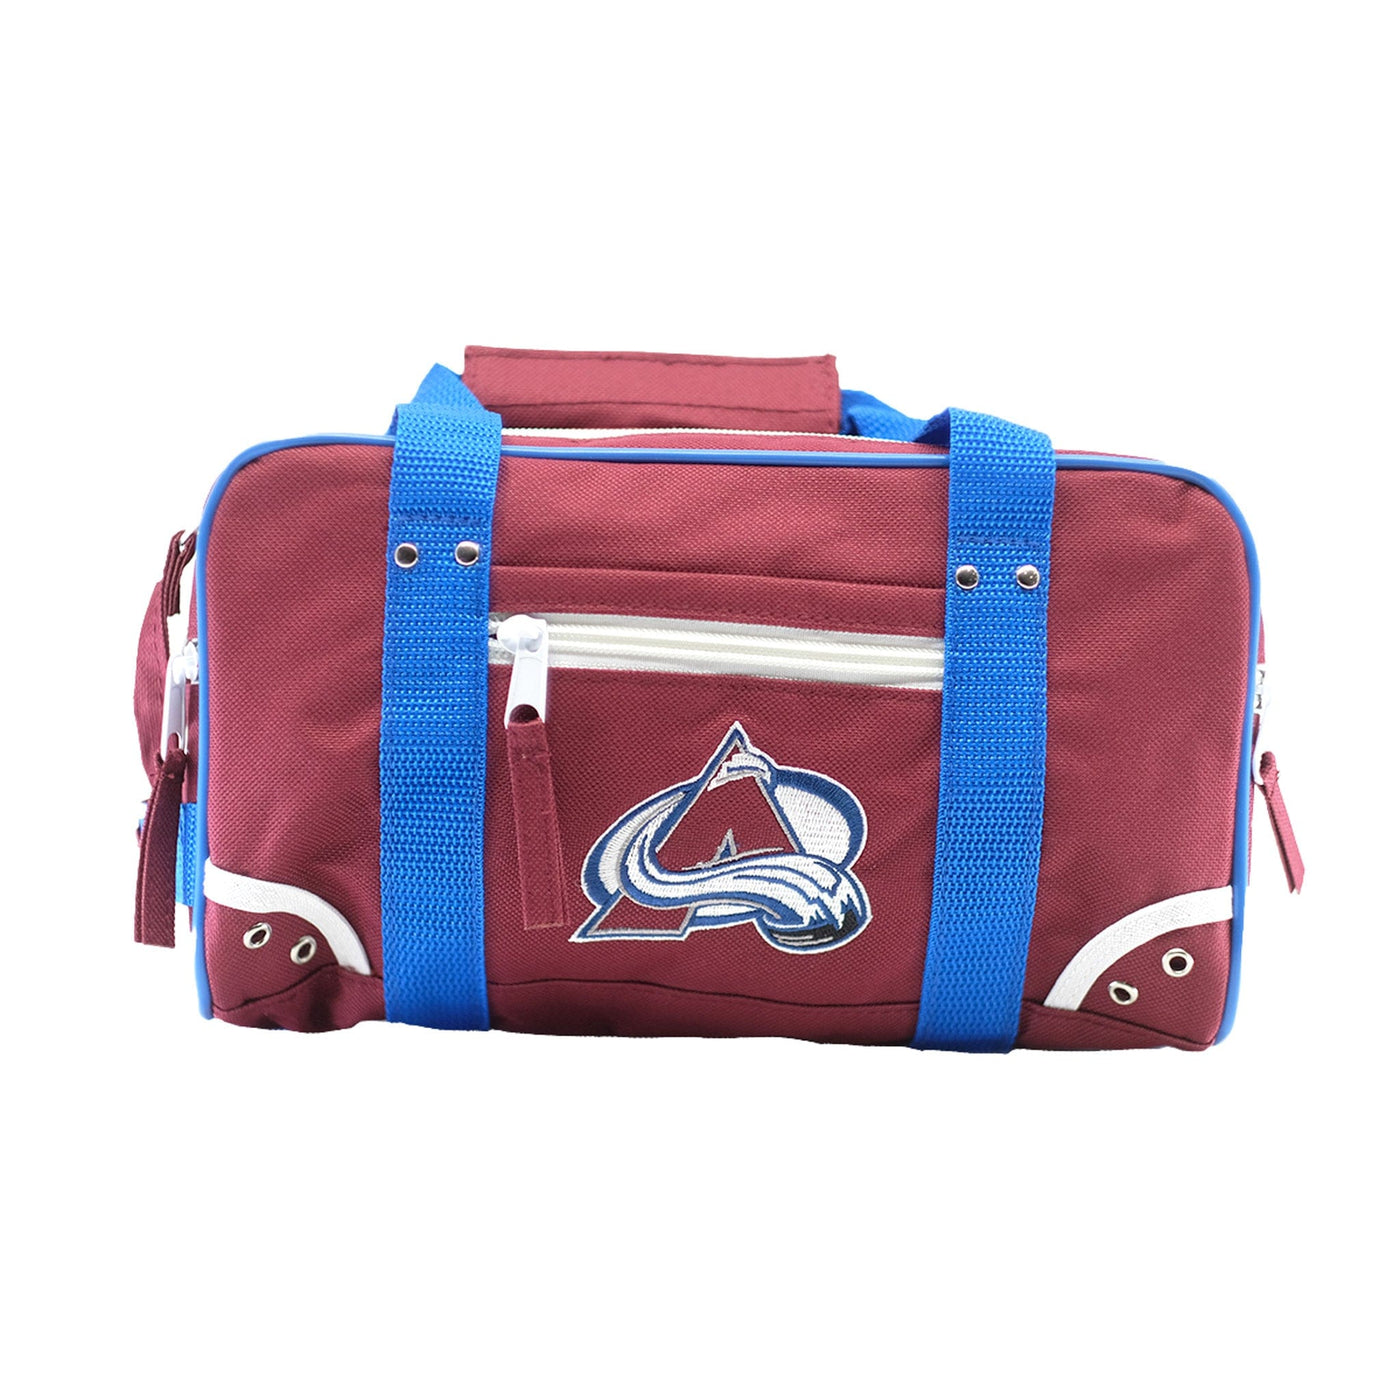 Colorado Avalanche Ultimate Sports Kit NHL Toiletry Bag - The Hockey Shop Source For Sports